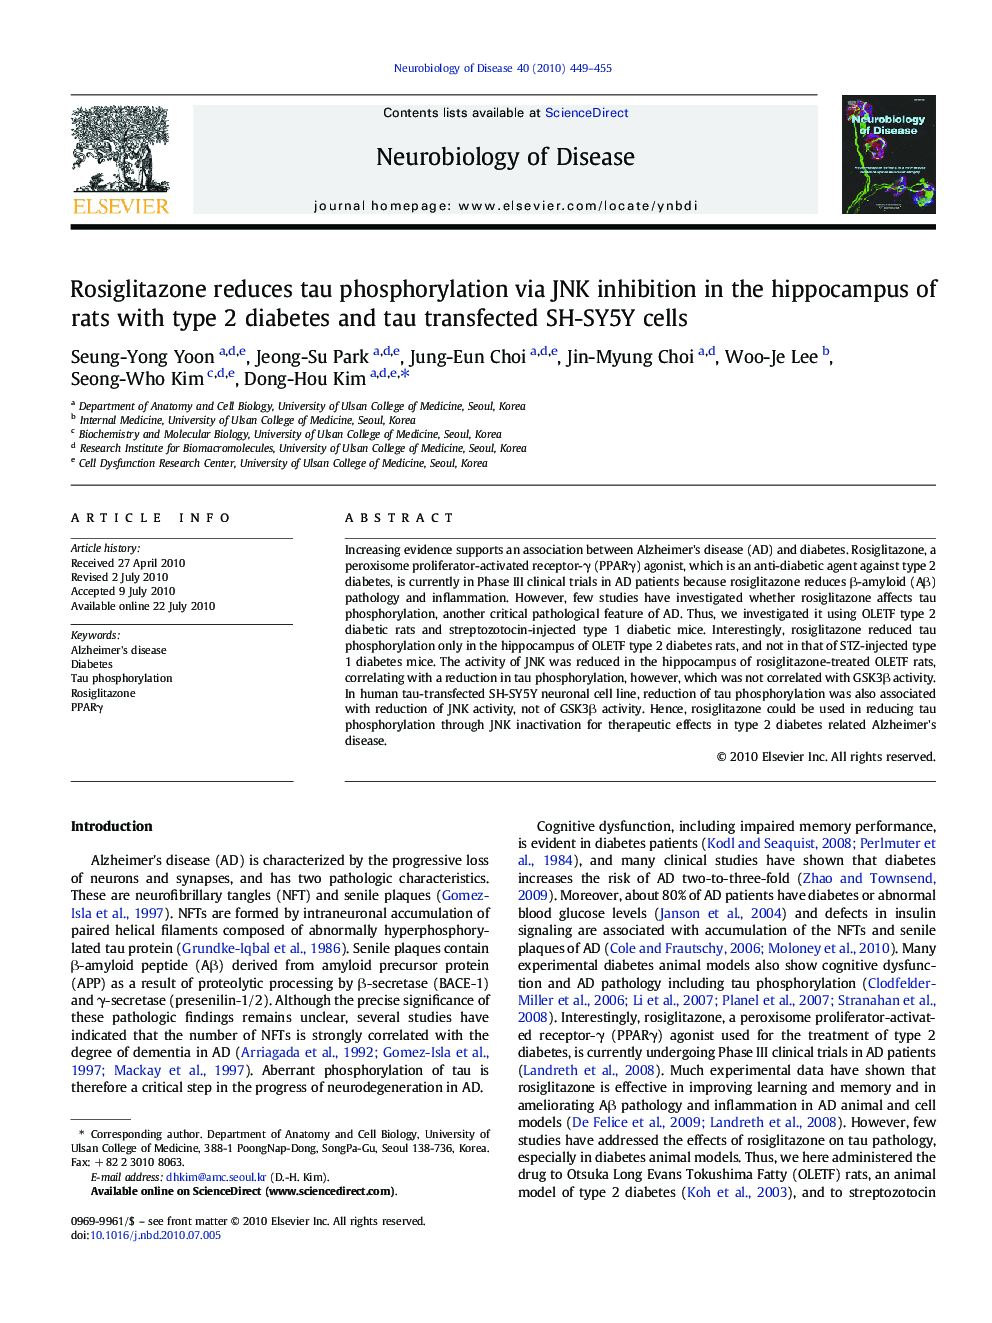 Rosiglitazone reduces tau phosphorylation via JNK inhibition in the hippocampus of rats with type 2 diabetes and tau transfected SH-SY5Y cells